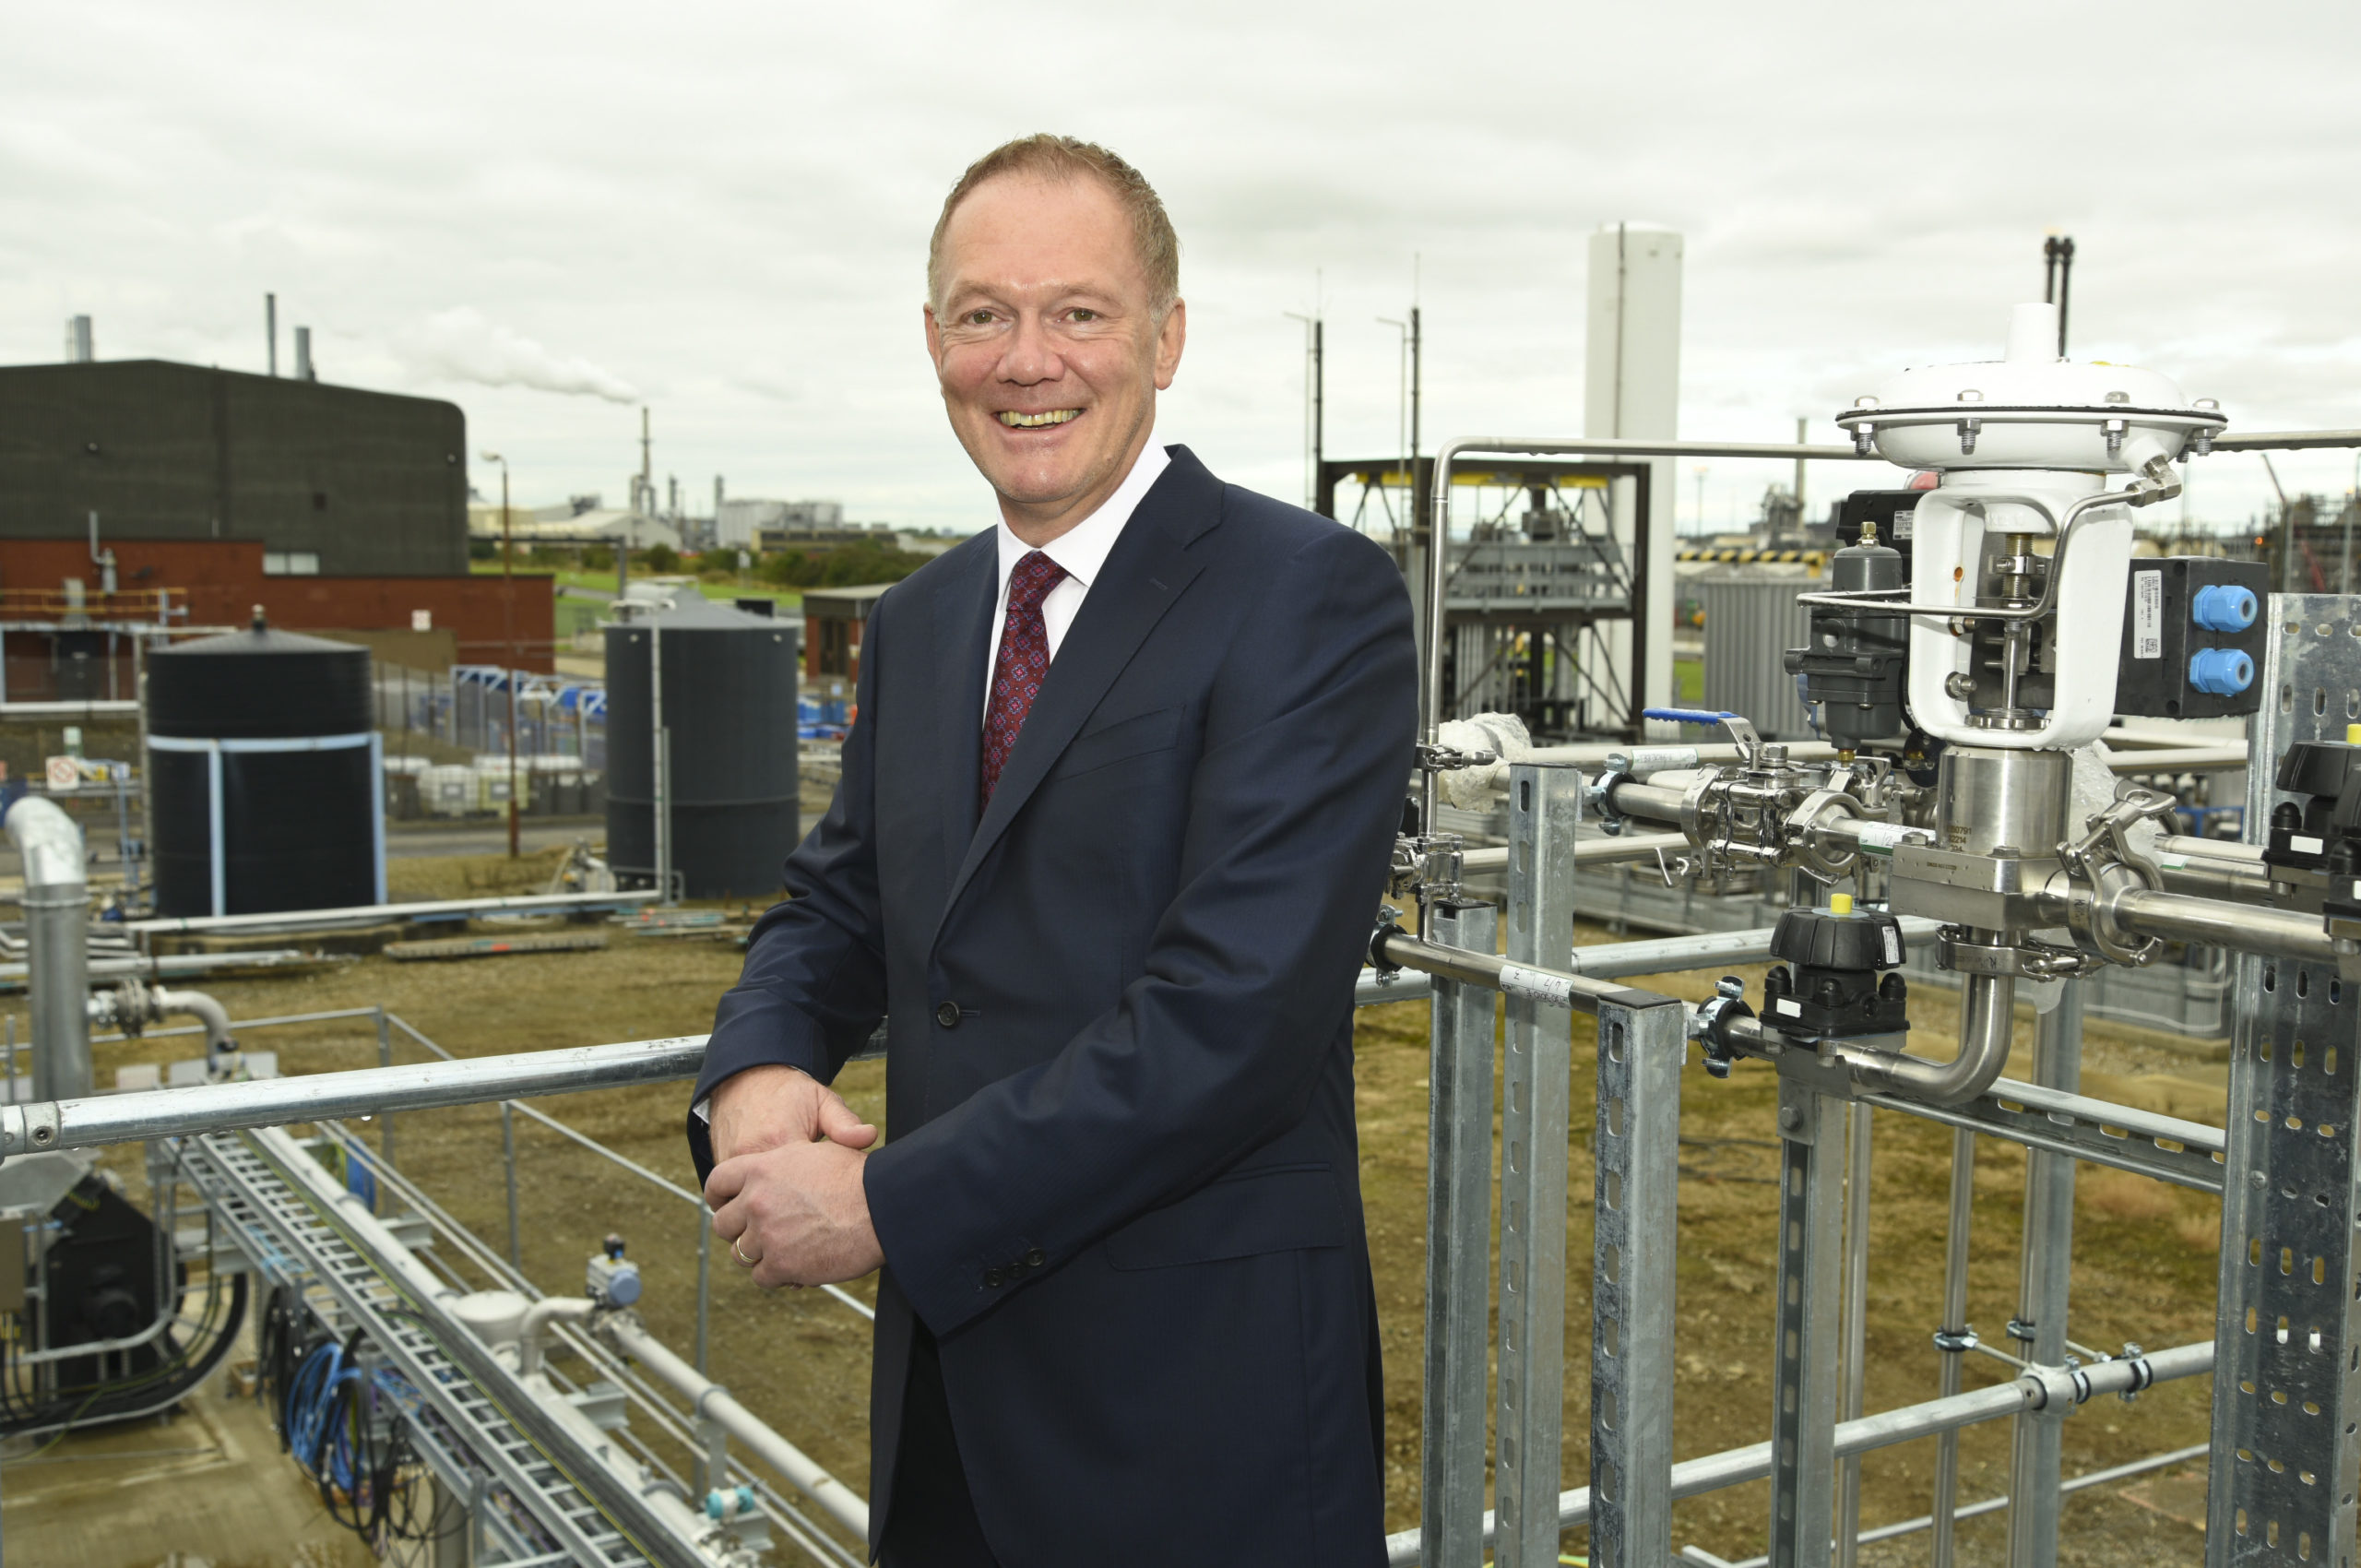 Calysta president and CEO Alan Shaw at the company's UK trial site in Teesside (photo: Calysta)